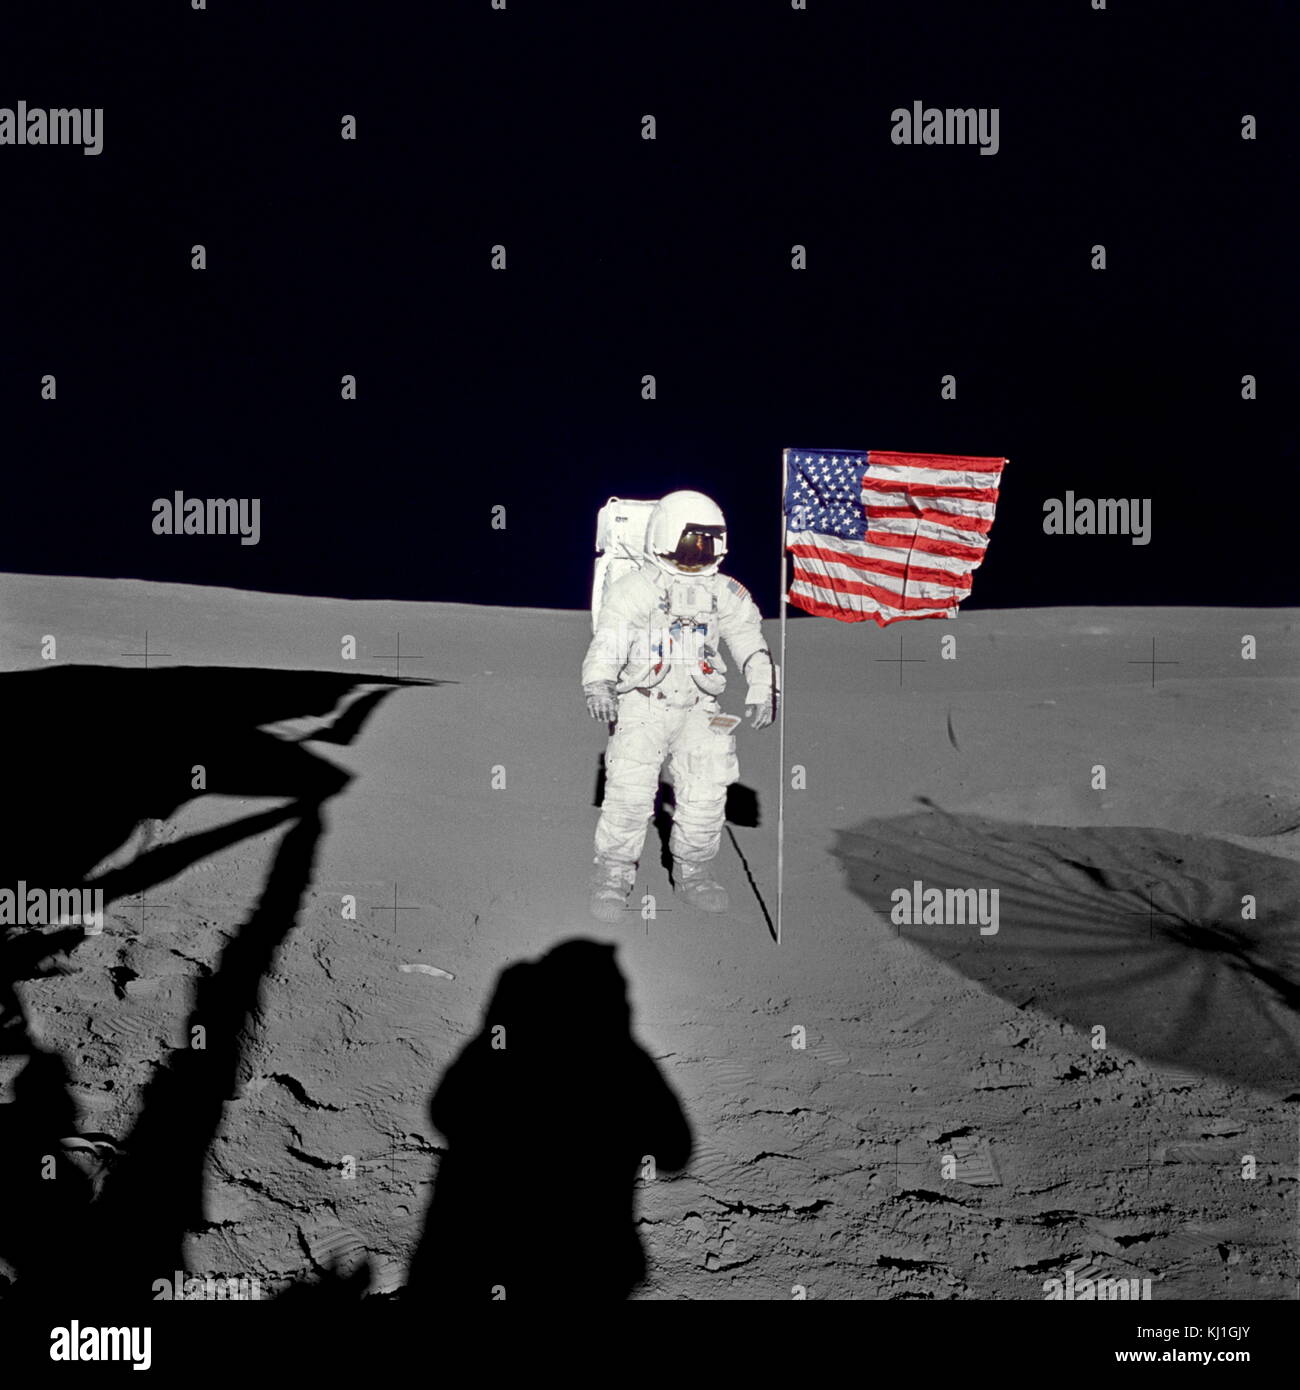 Astronaut Edgar D. Mitchell, lunar module pilot for the Apollo 14 lunar landing mission, stands by the deployed U.S. flag on the lunar surface during the early moments of the first extravehicular activity (EVA) of the mission. He was photographed by astronaut Alan B. Shepard Jr., mission commander, Stock Photo